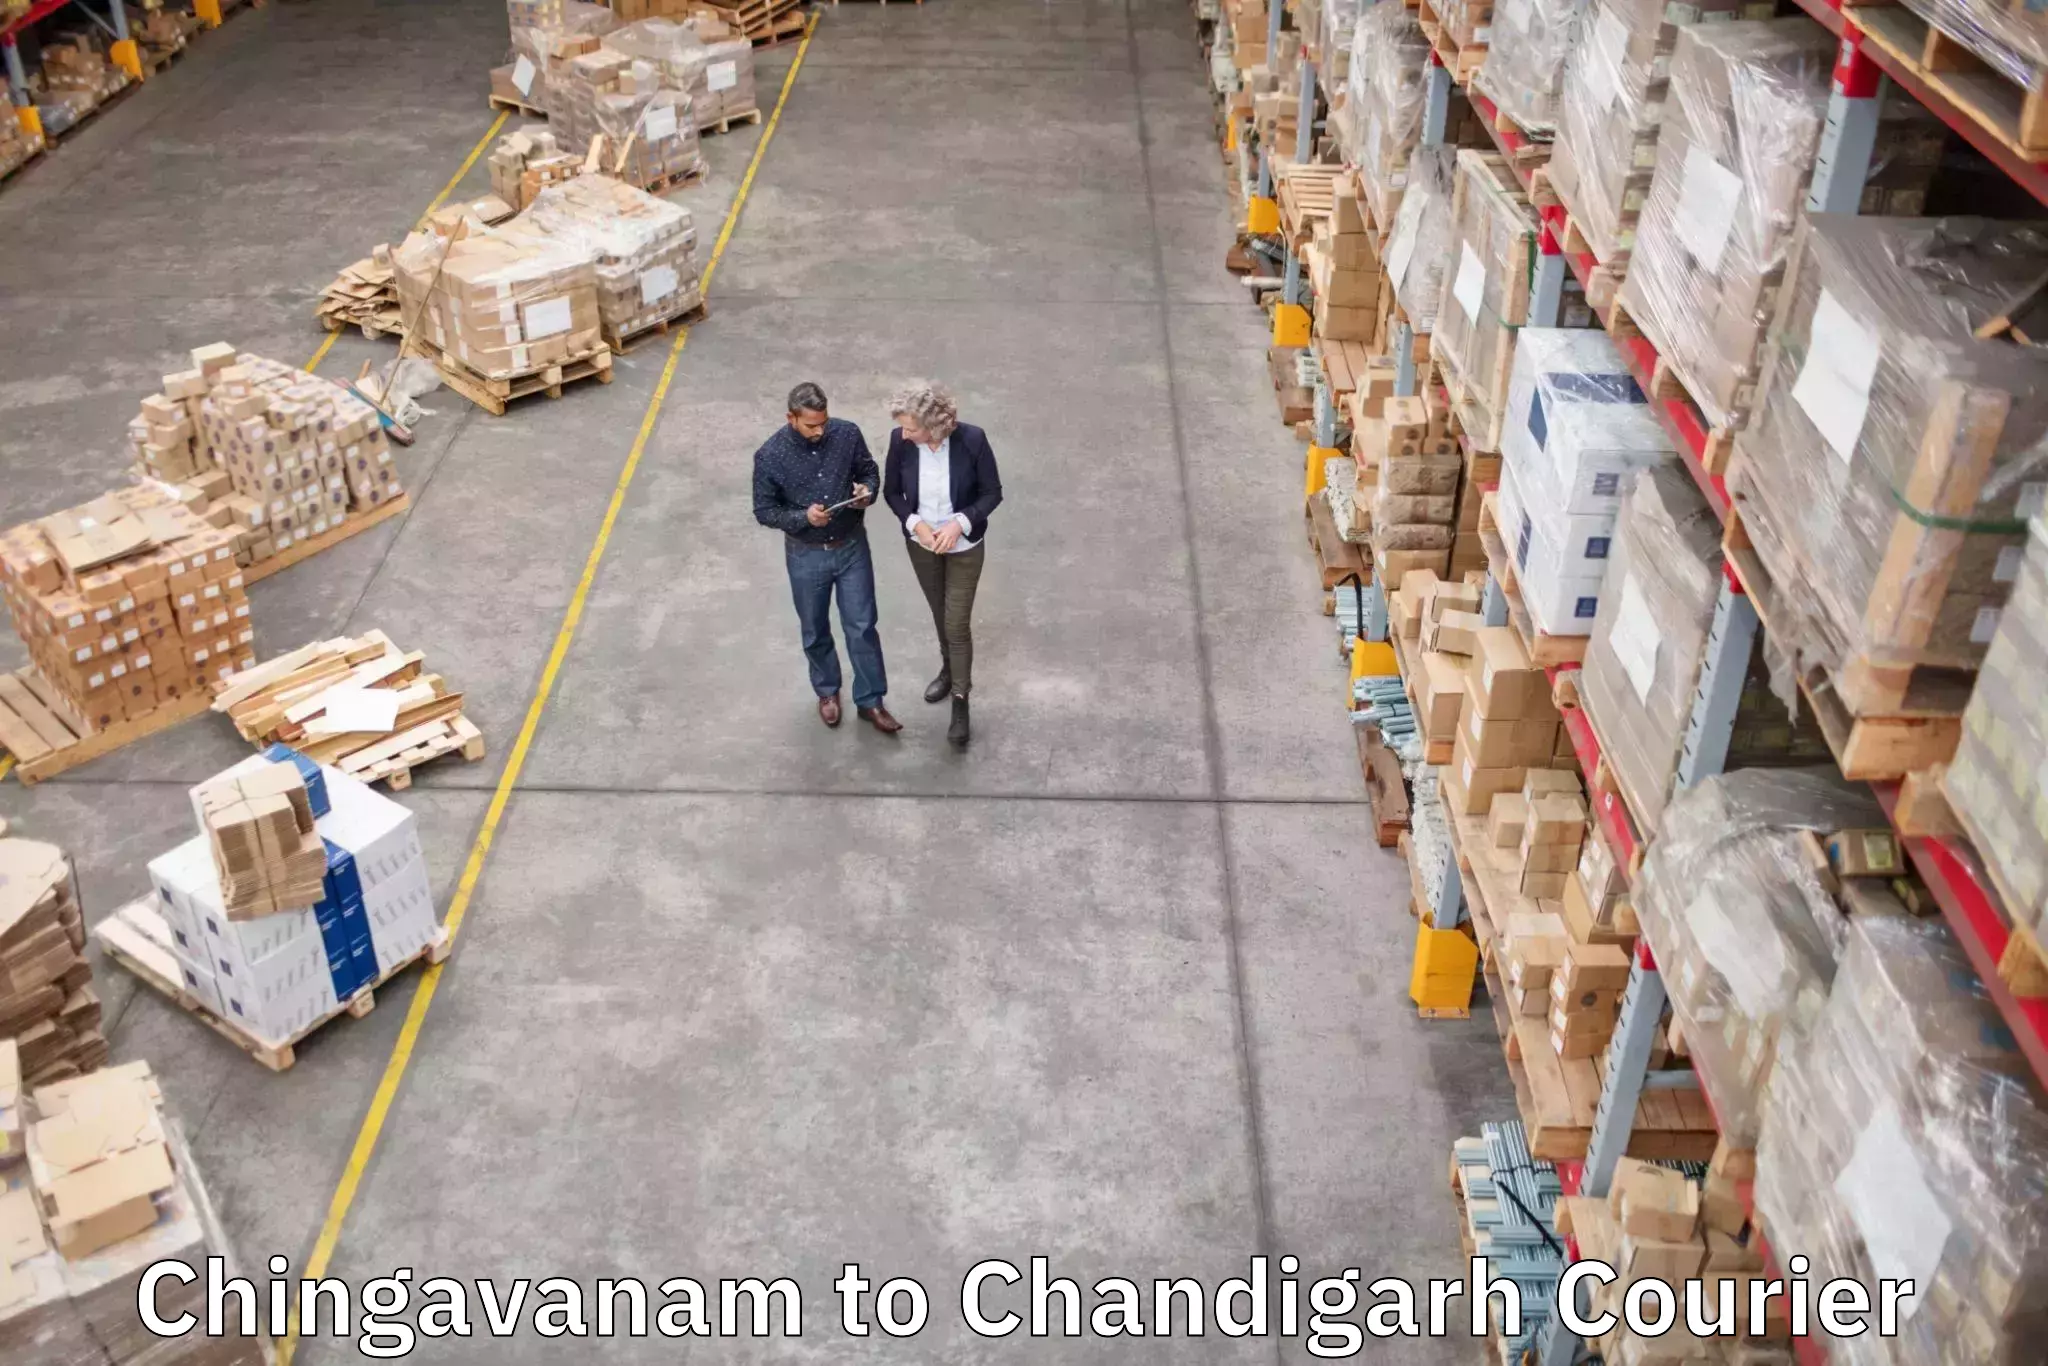 Luggage shipping specialists Chingavanam to Chandigarh